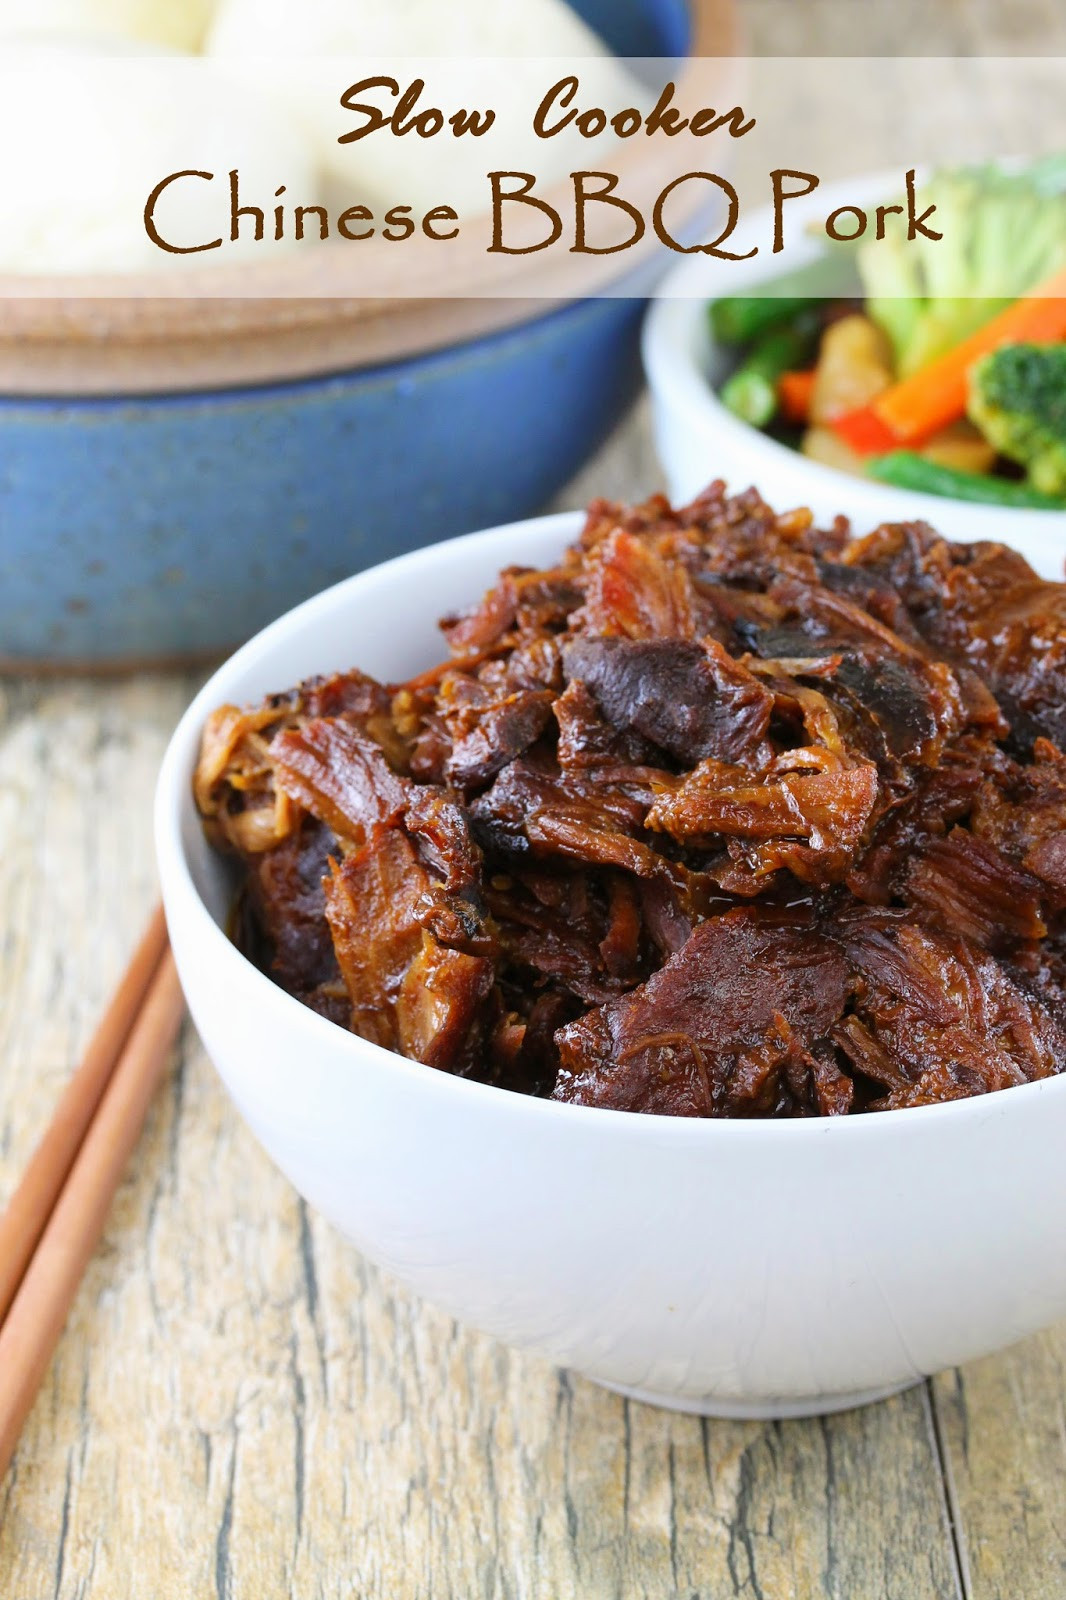 Pulled Pork Rubs Slow Cooker
 Slow Cooker Chinese BBQ Pork thestayathomechef